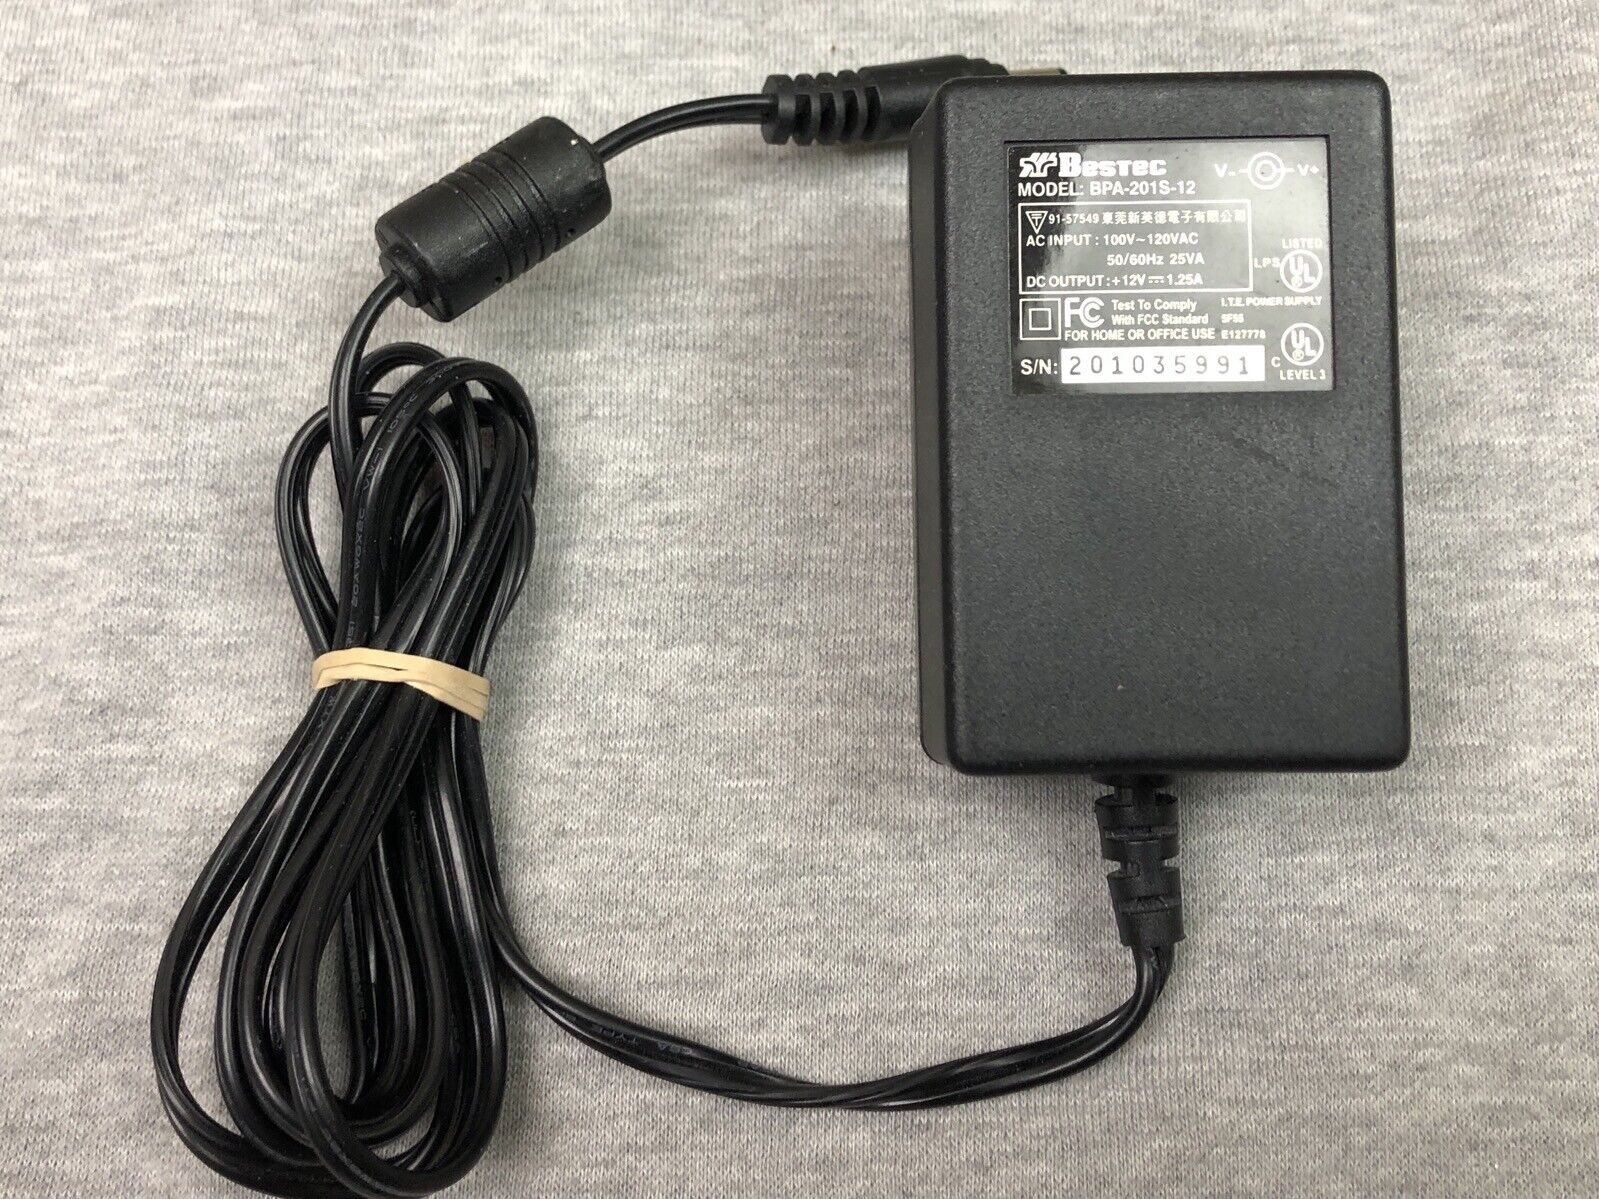 Bestec BPA-201S-12 AC Adapter Output DC 12V 1.25A Brand: Bestec Type: AC/DC Adapter UPC: Does not apply Output: D